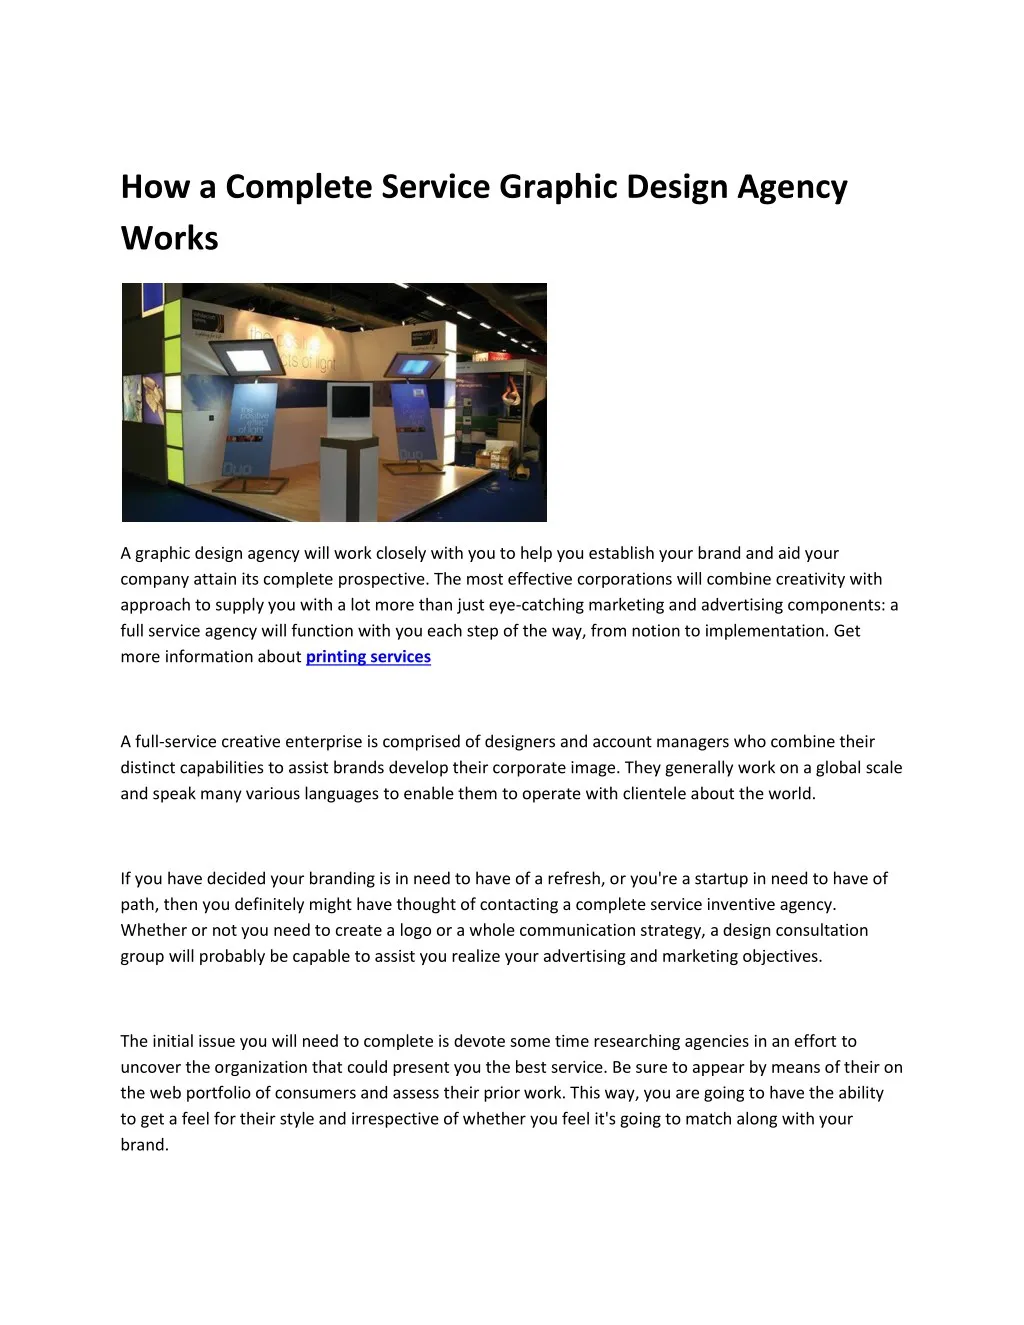 how a complete service graphic design agency works